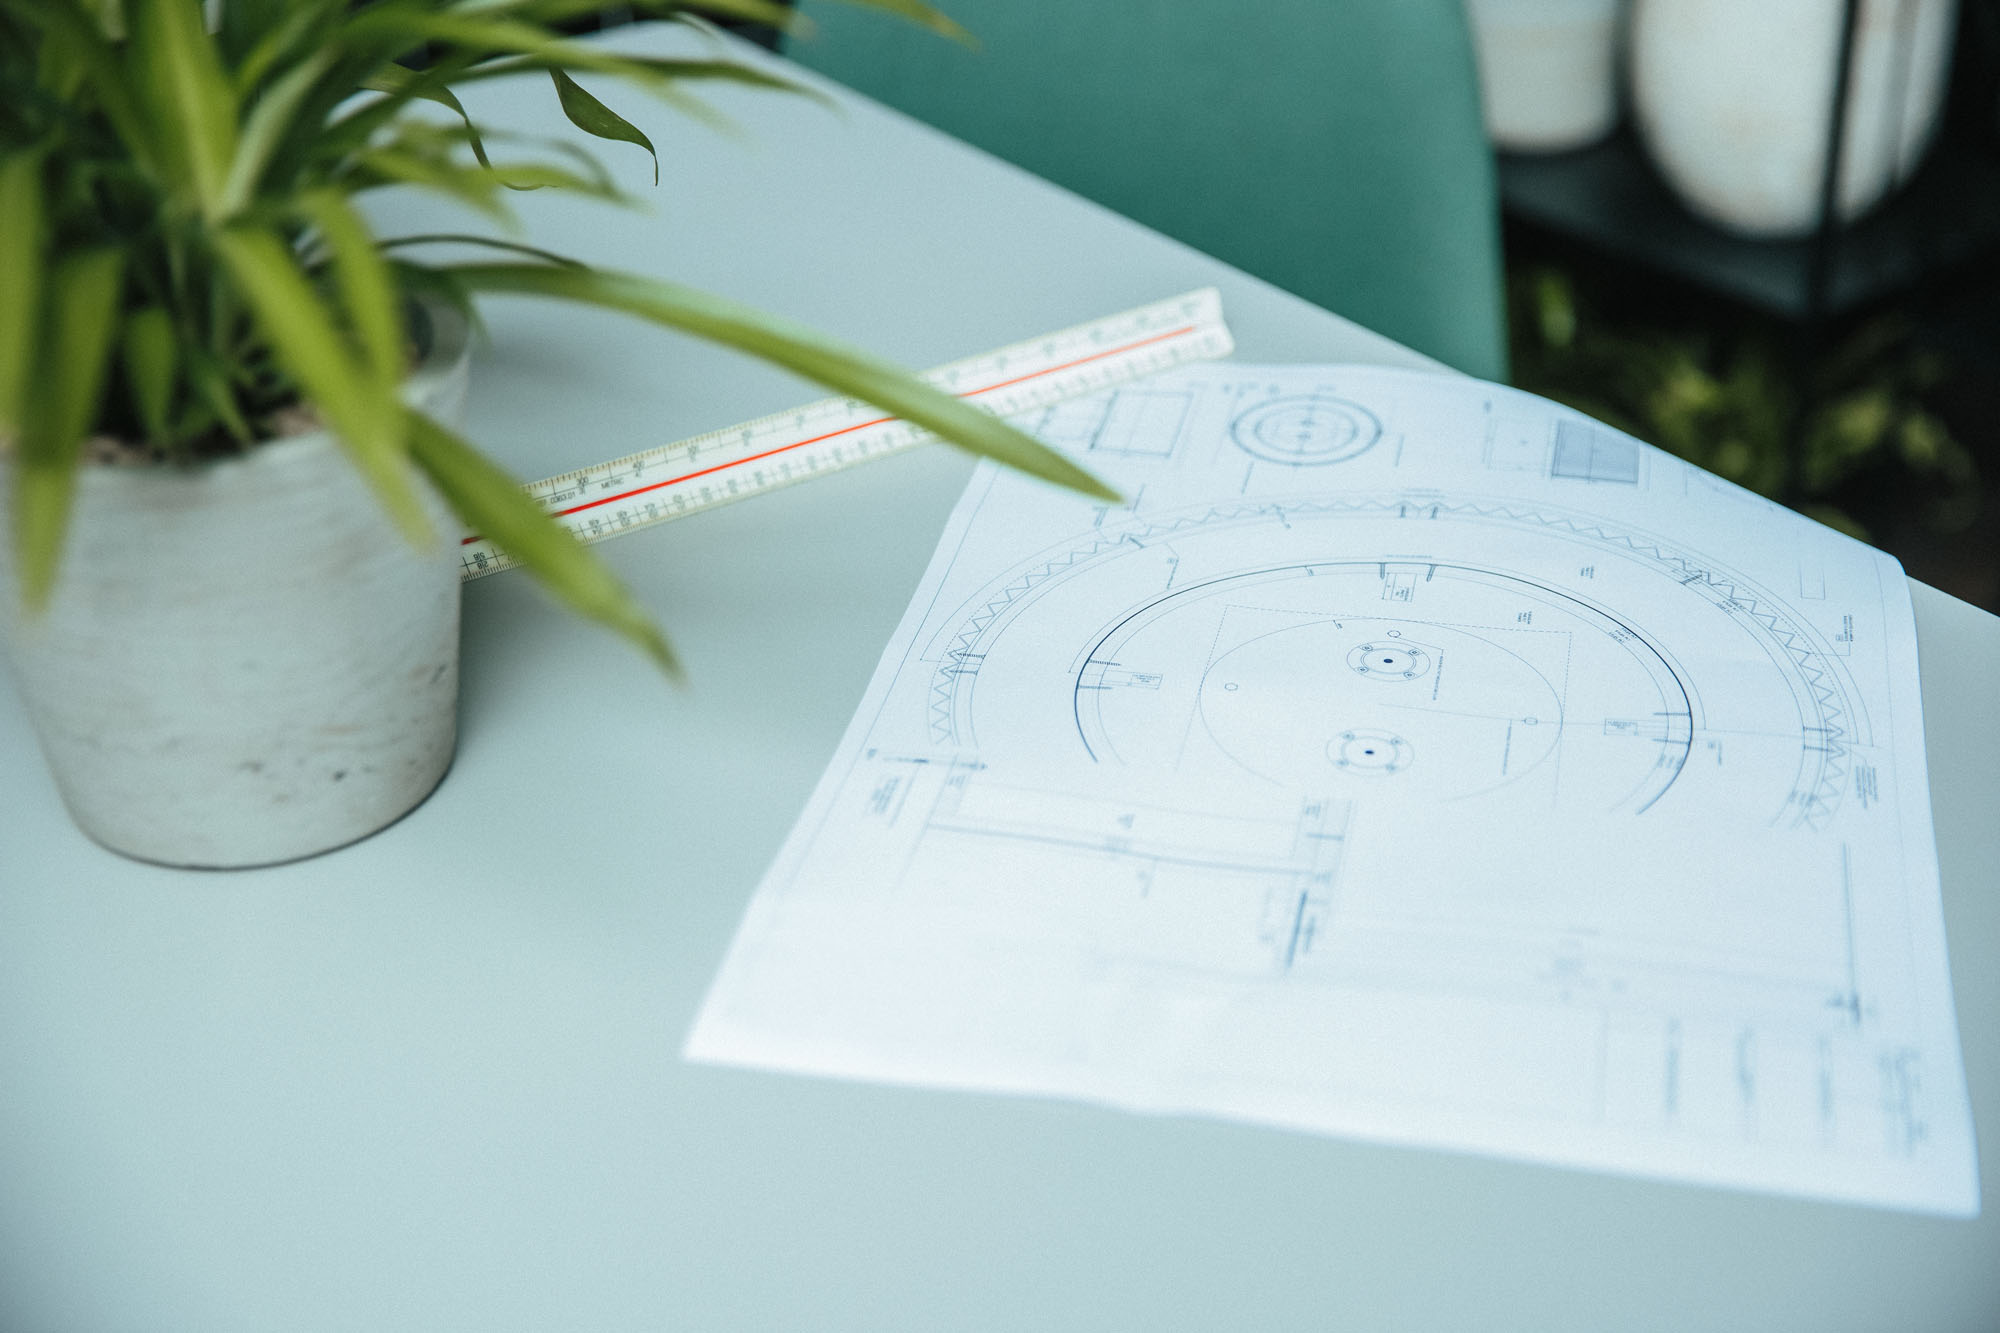 architecture sketches on table with plant and ruler